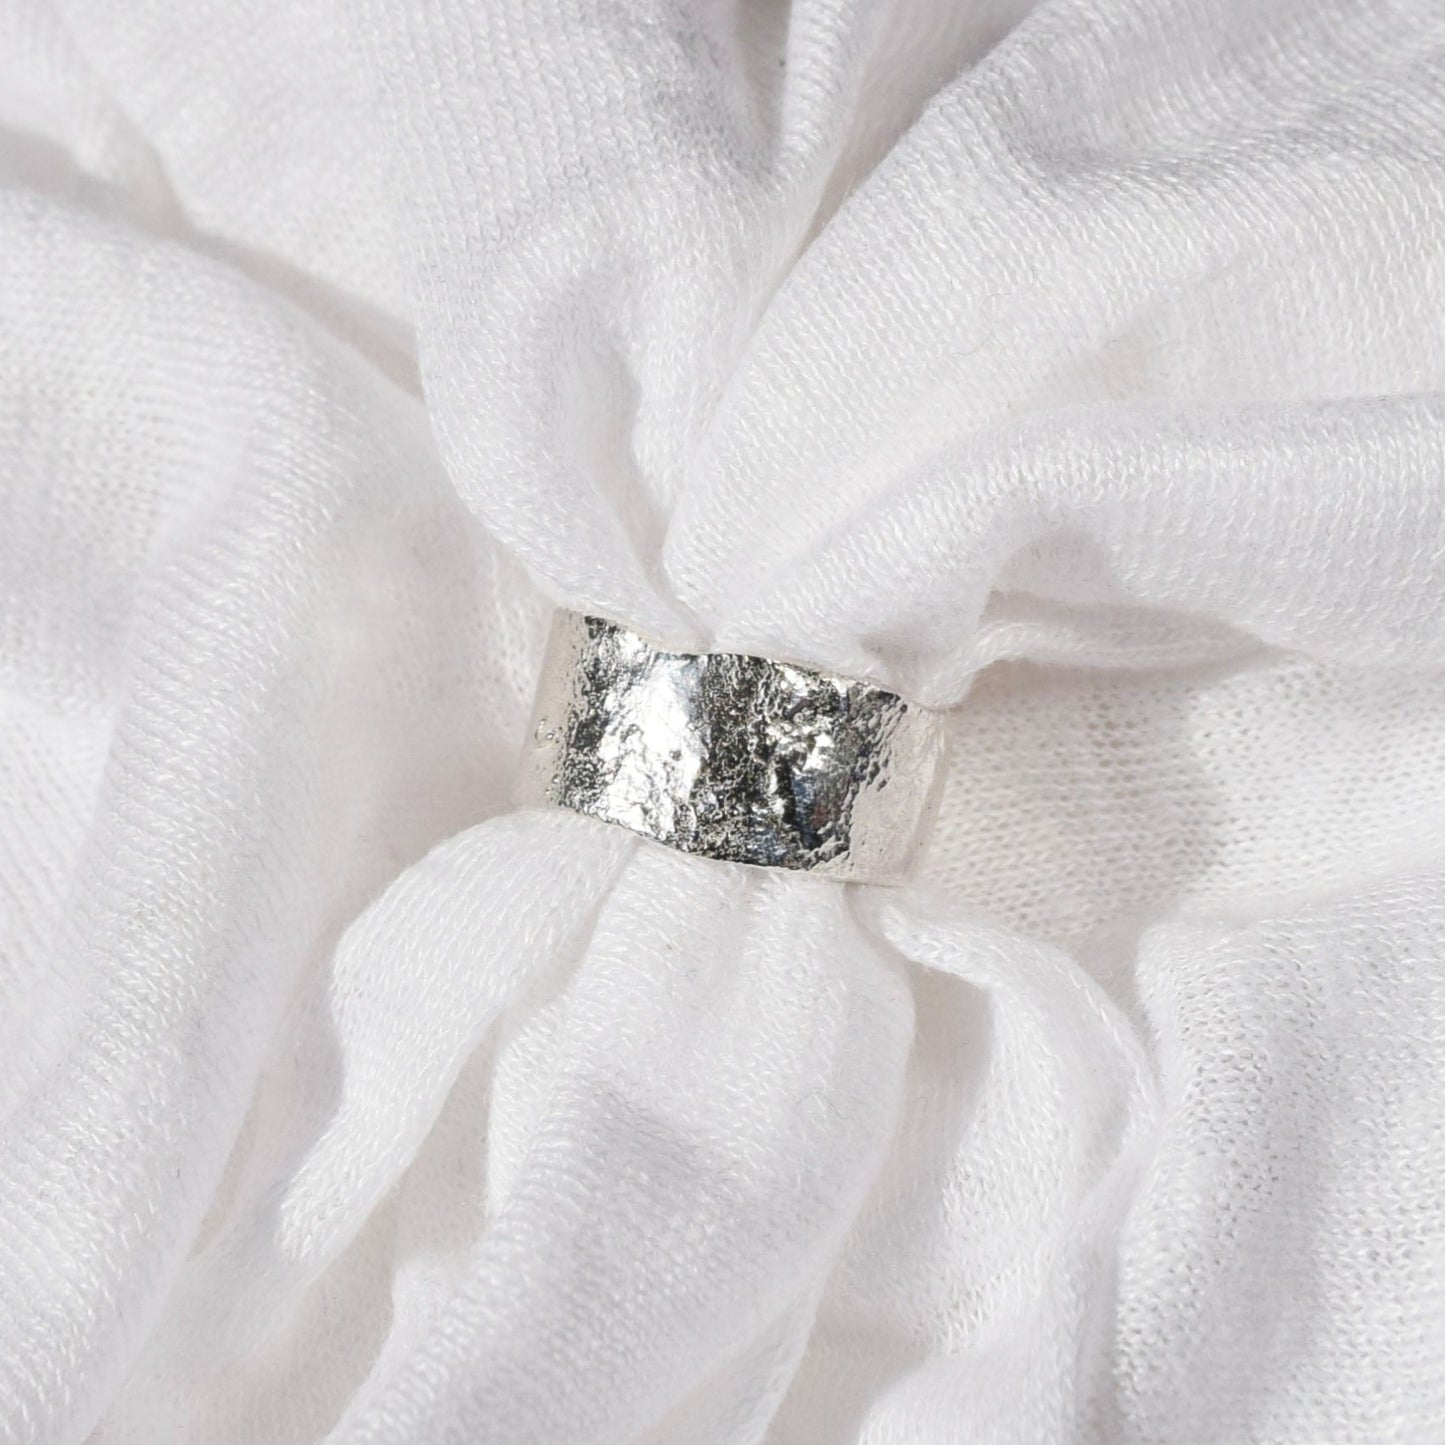 wide molten band ring placed within white fabric